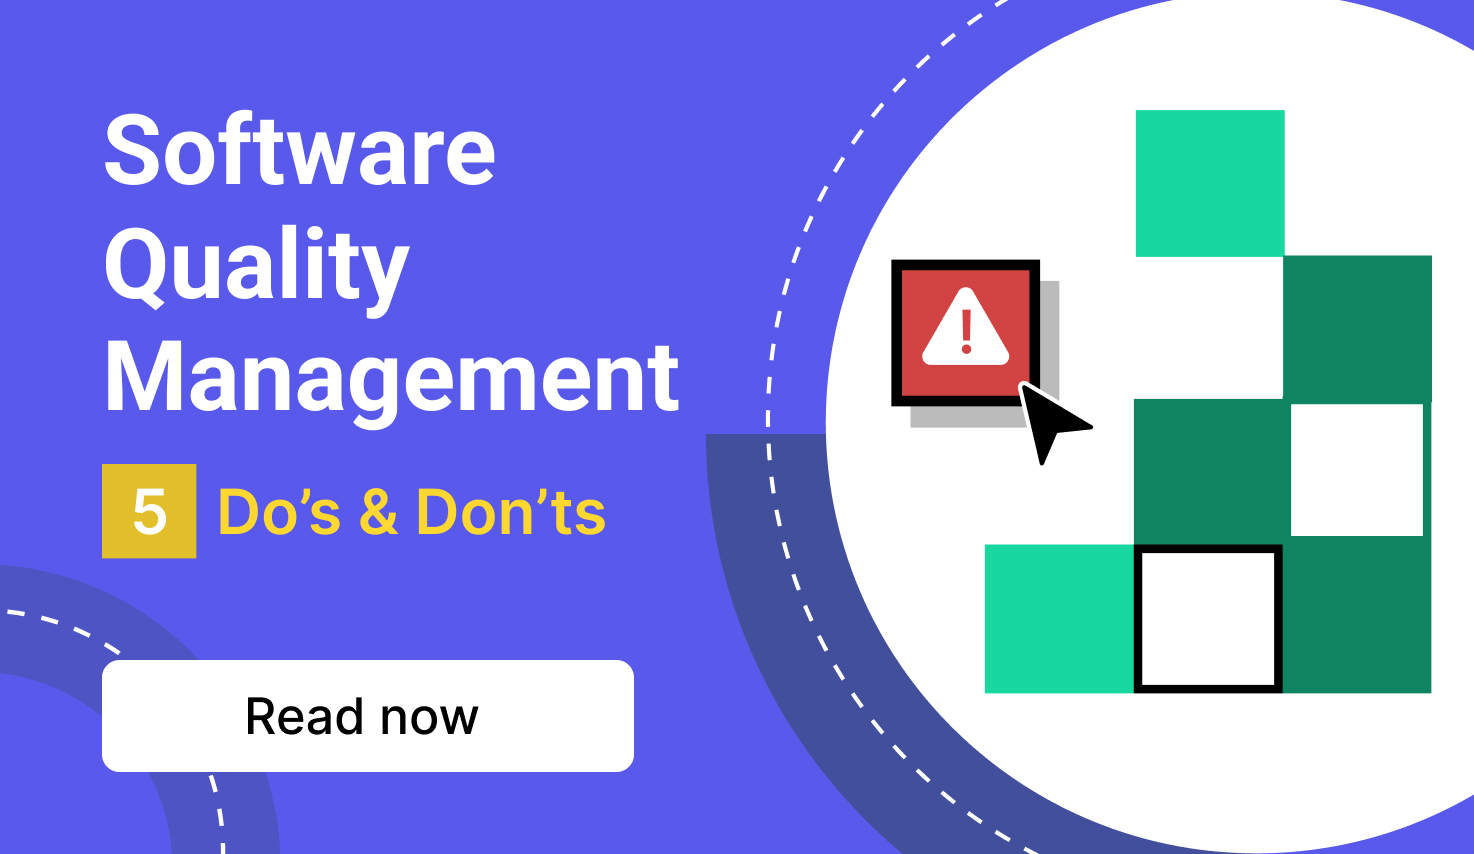 Software Quality Management Best Practices | 5 Do's & Don'ts